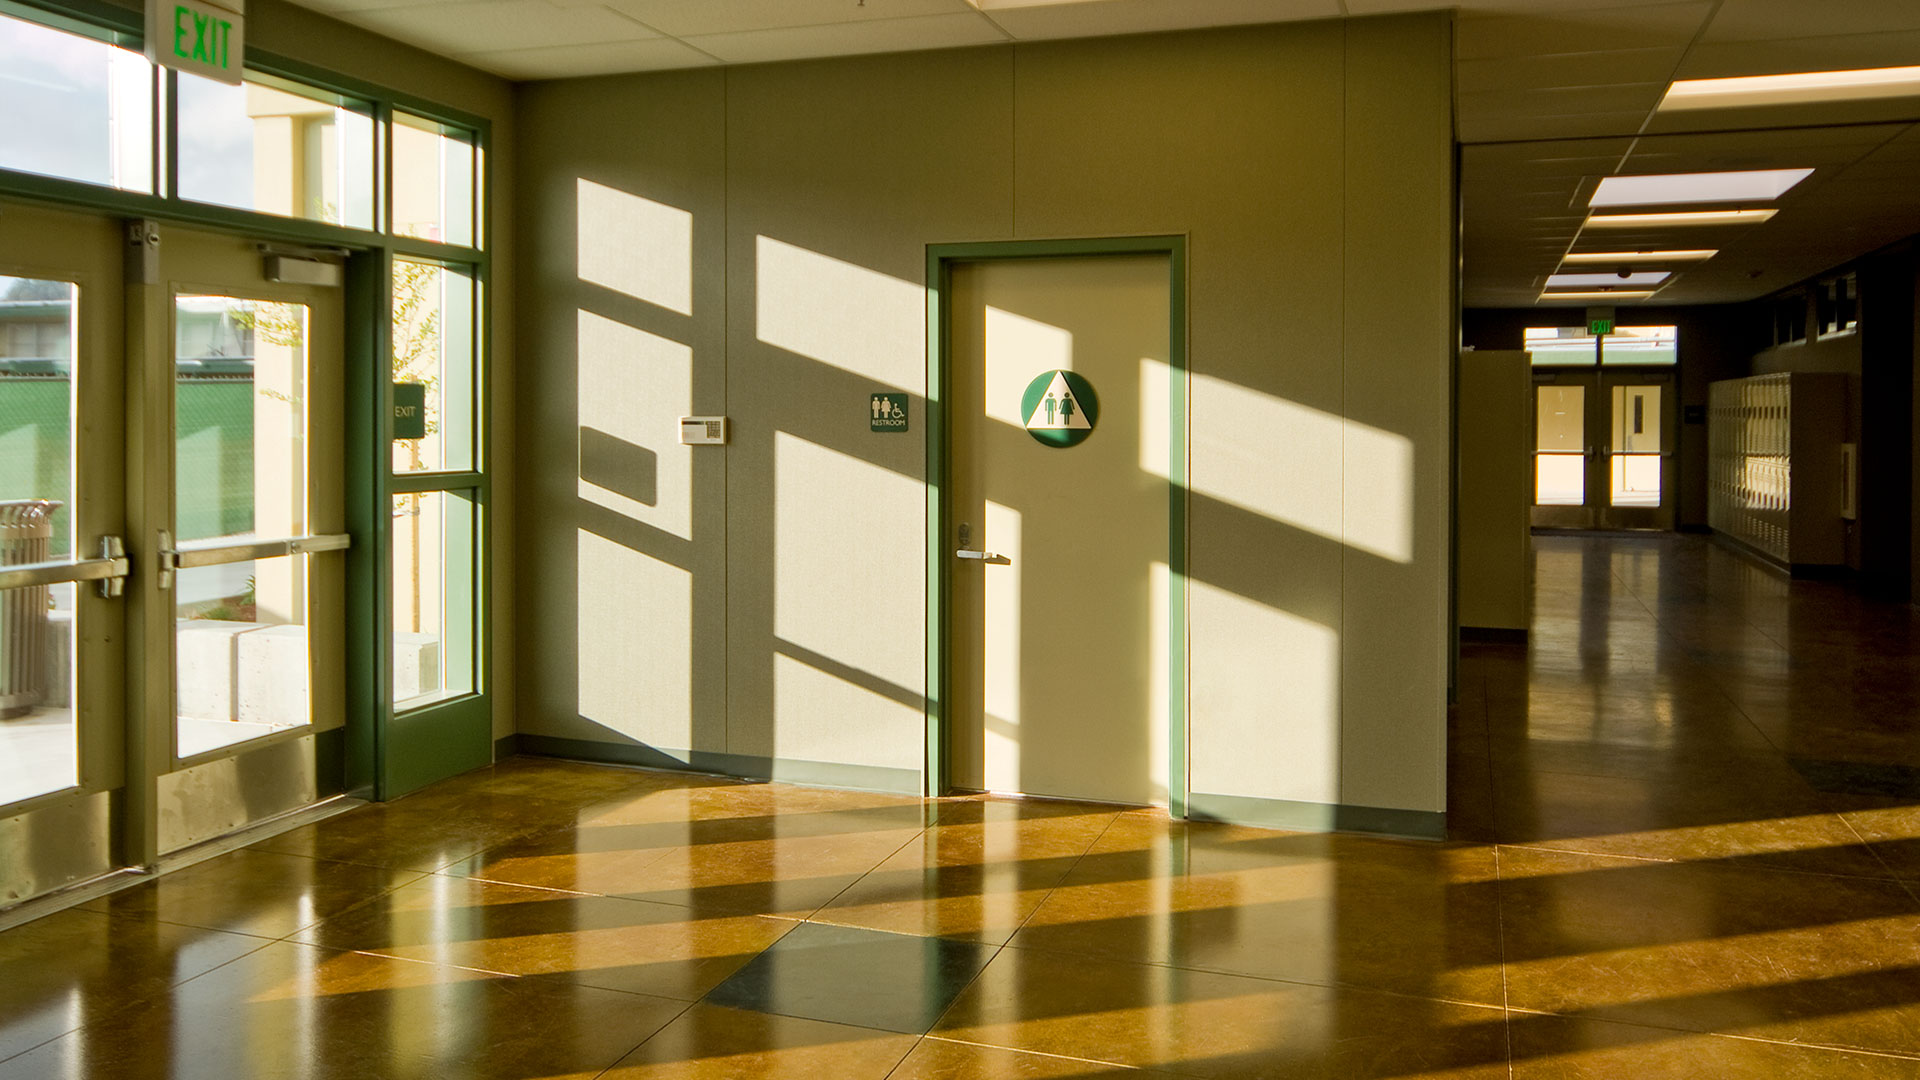 Interior of classroom wing with light shining in through entrance and illuminating floor and walls.